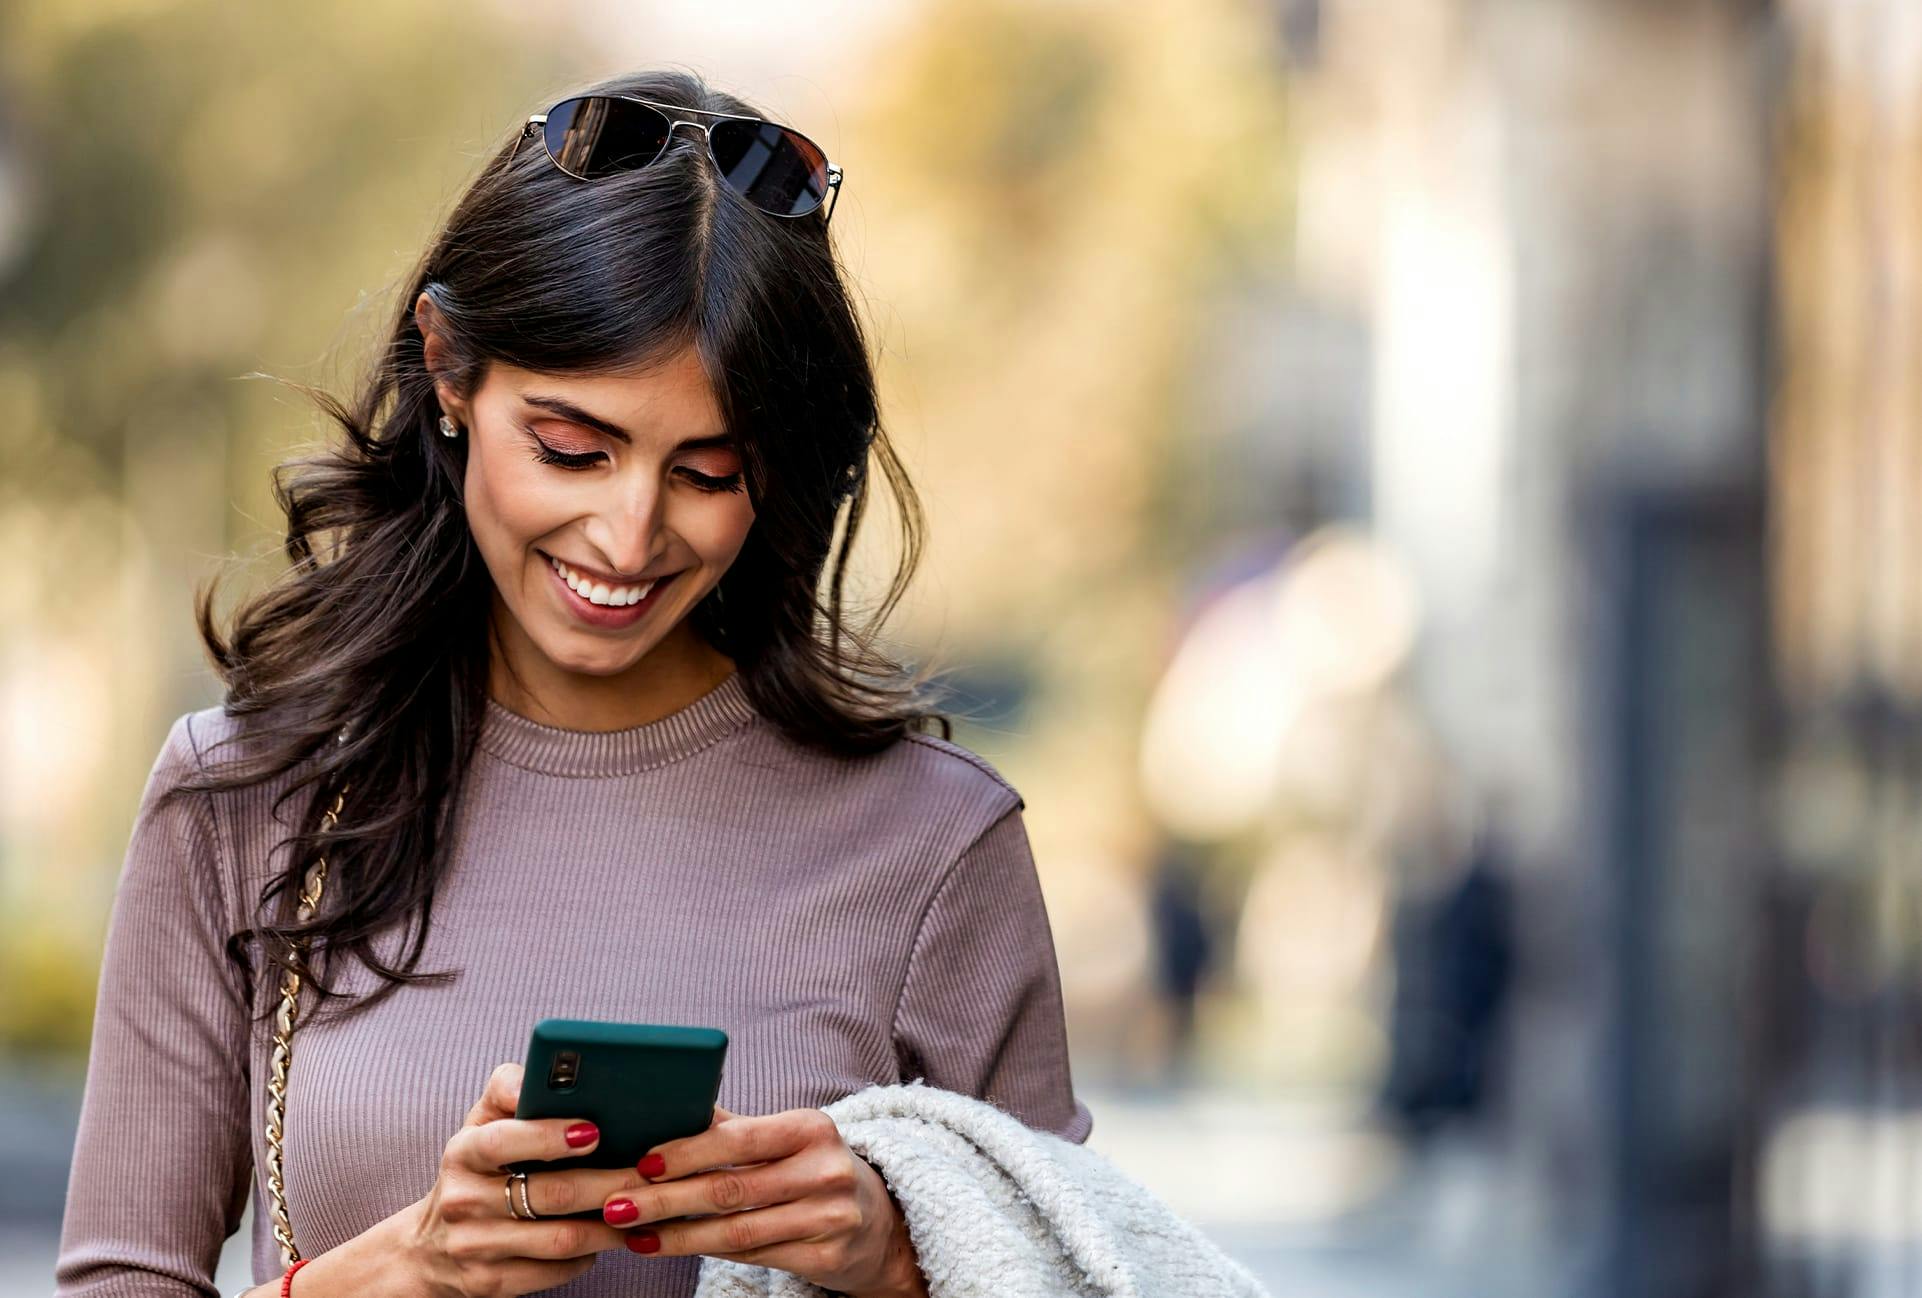 Woman Smiling looking at her Phone